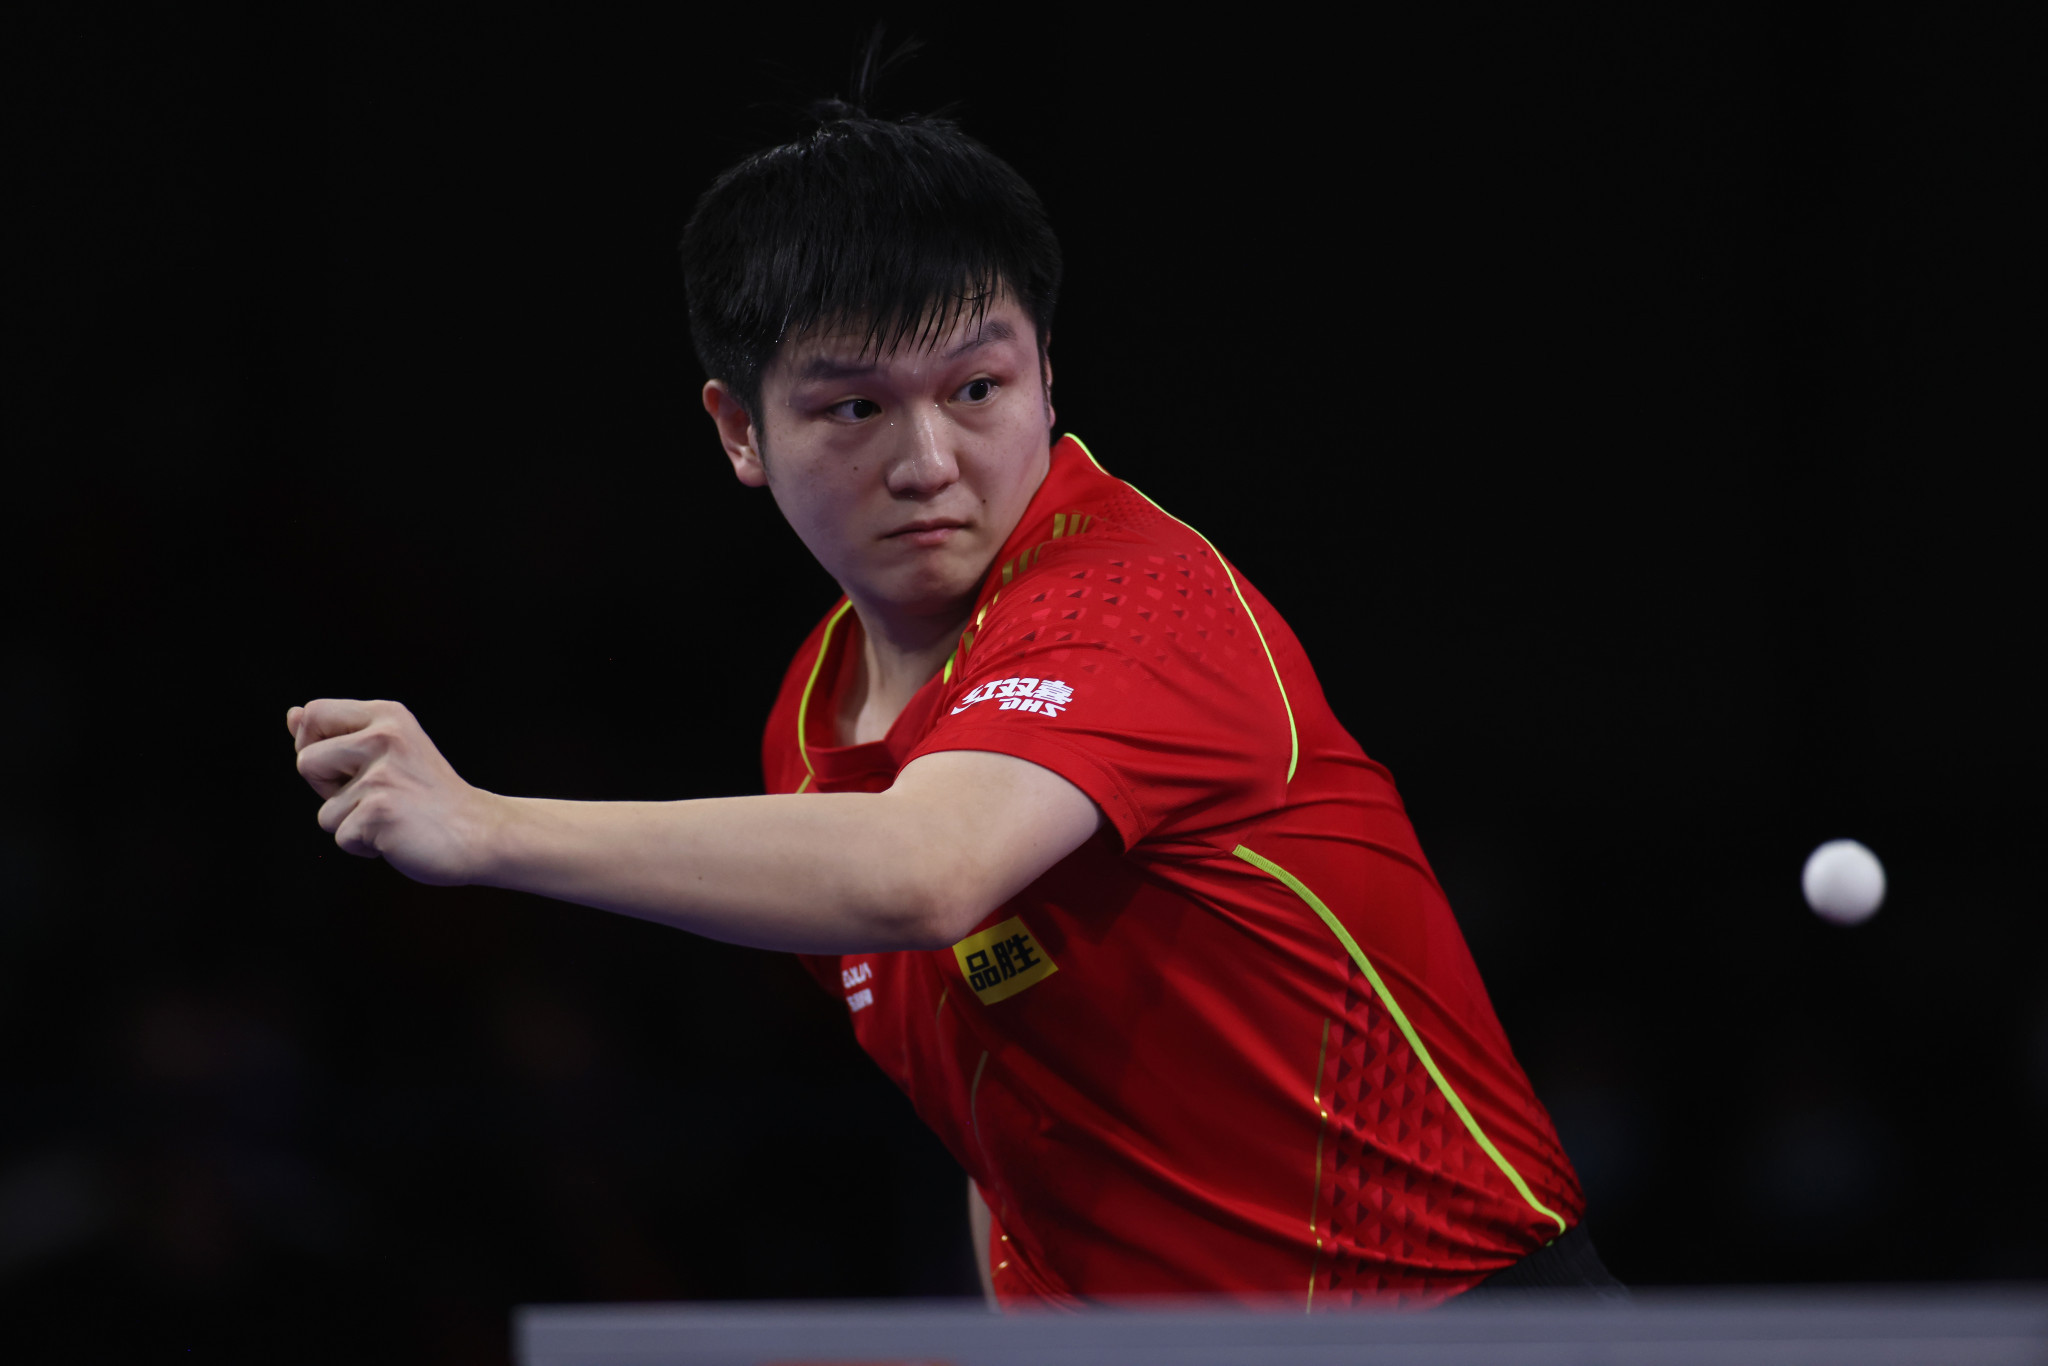 Nations seek to dethrone reigning champions China at ITTF World Team Table Tennis Championships